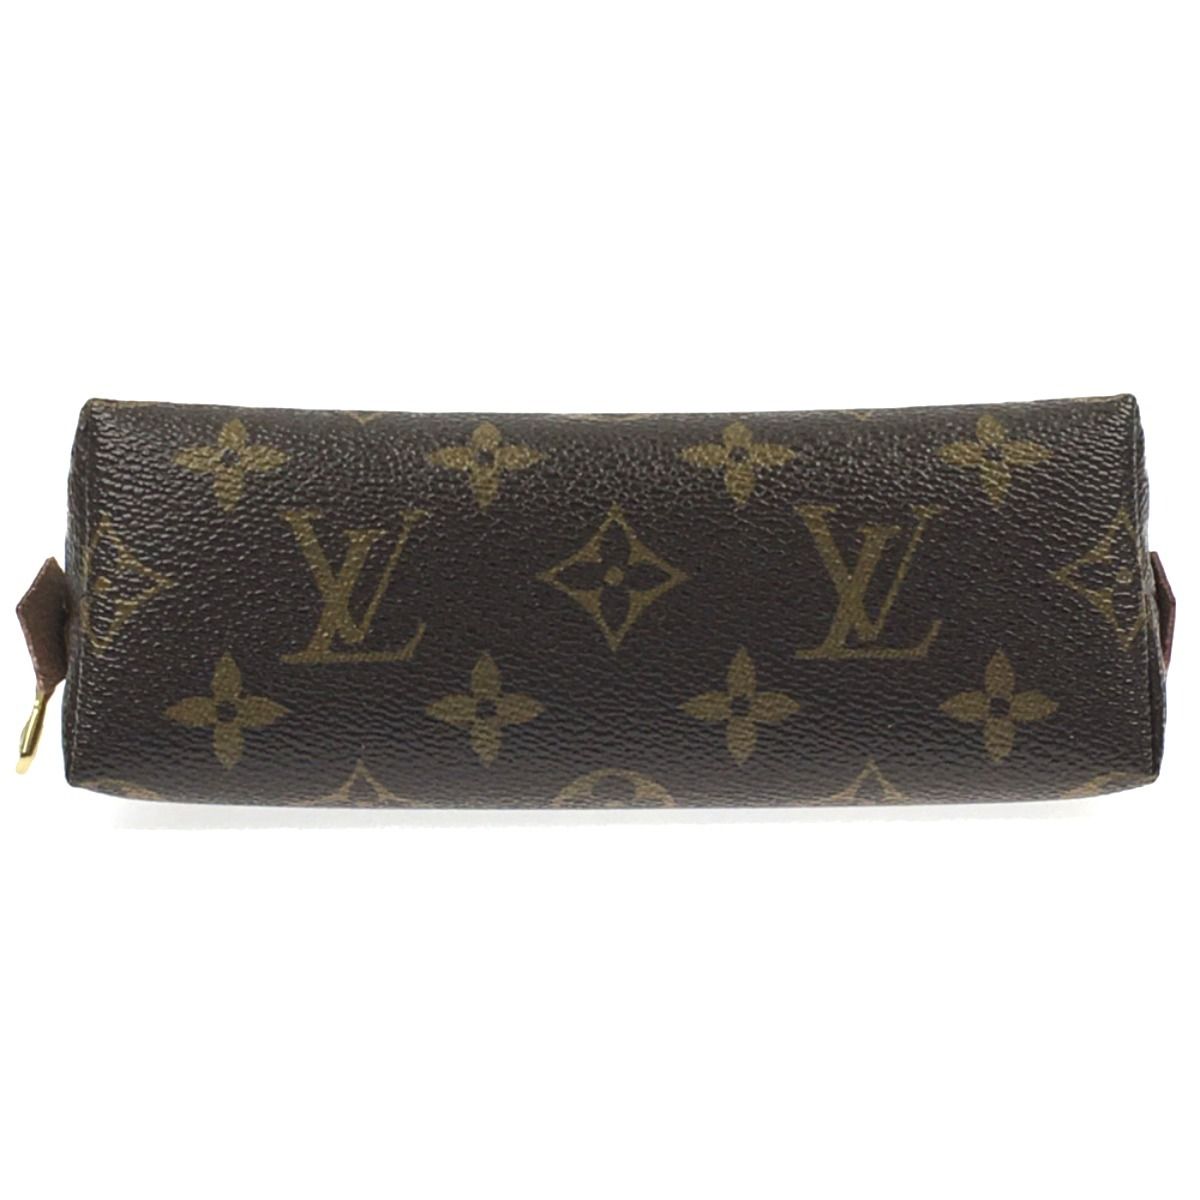 ▽▽LOUIS VUITTON ルイヴィトン モノグラム ポシェット ...